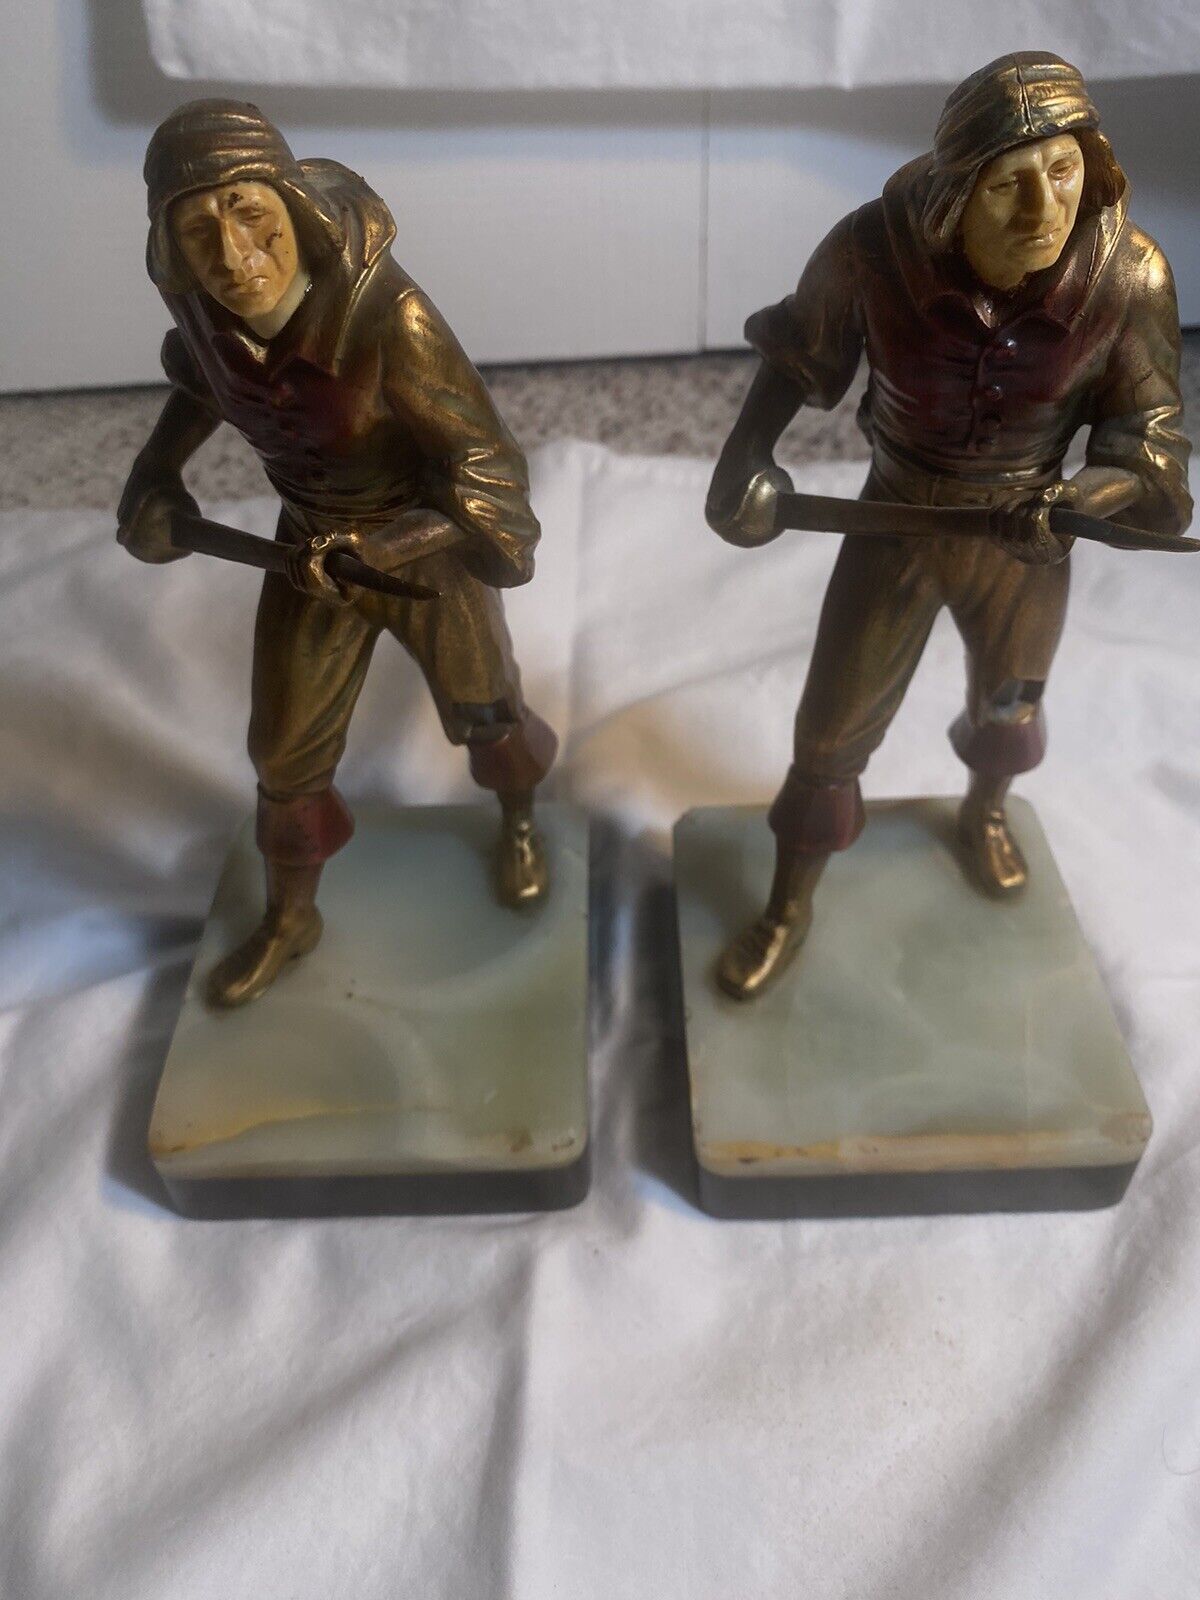 ANTIQUE MADE IN FRANCE PIRATE SWASHBUCKLER w SWORD ART STATUE SCULPTURE BOOKENDS